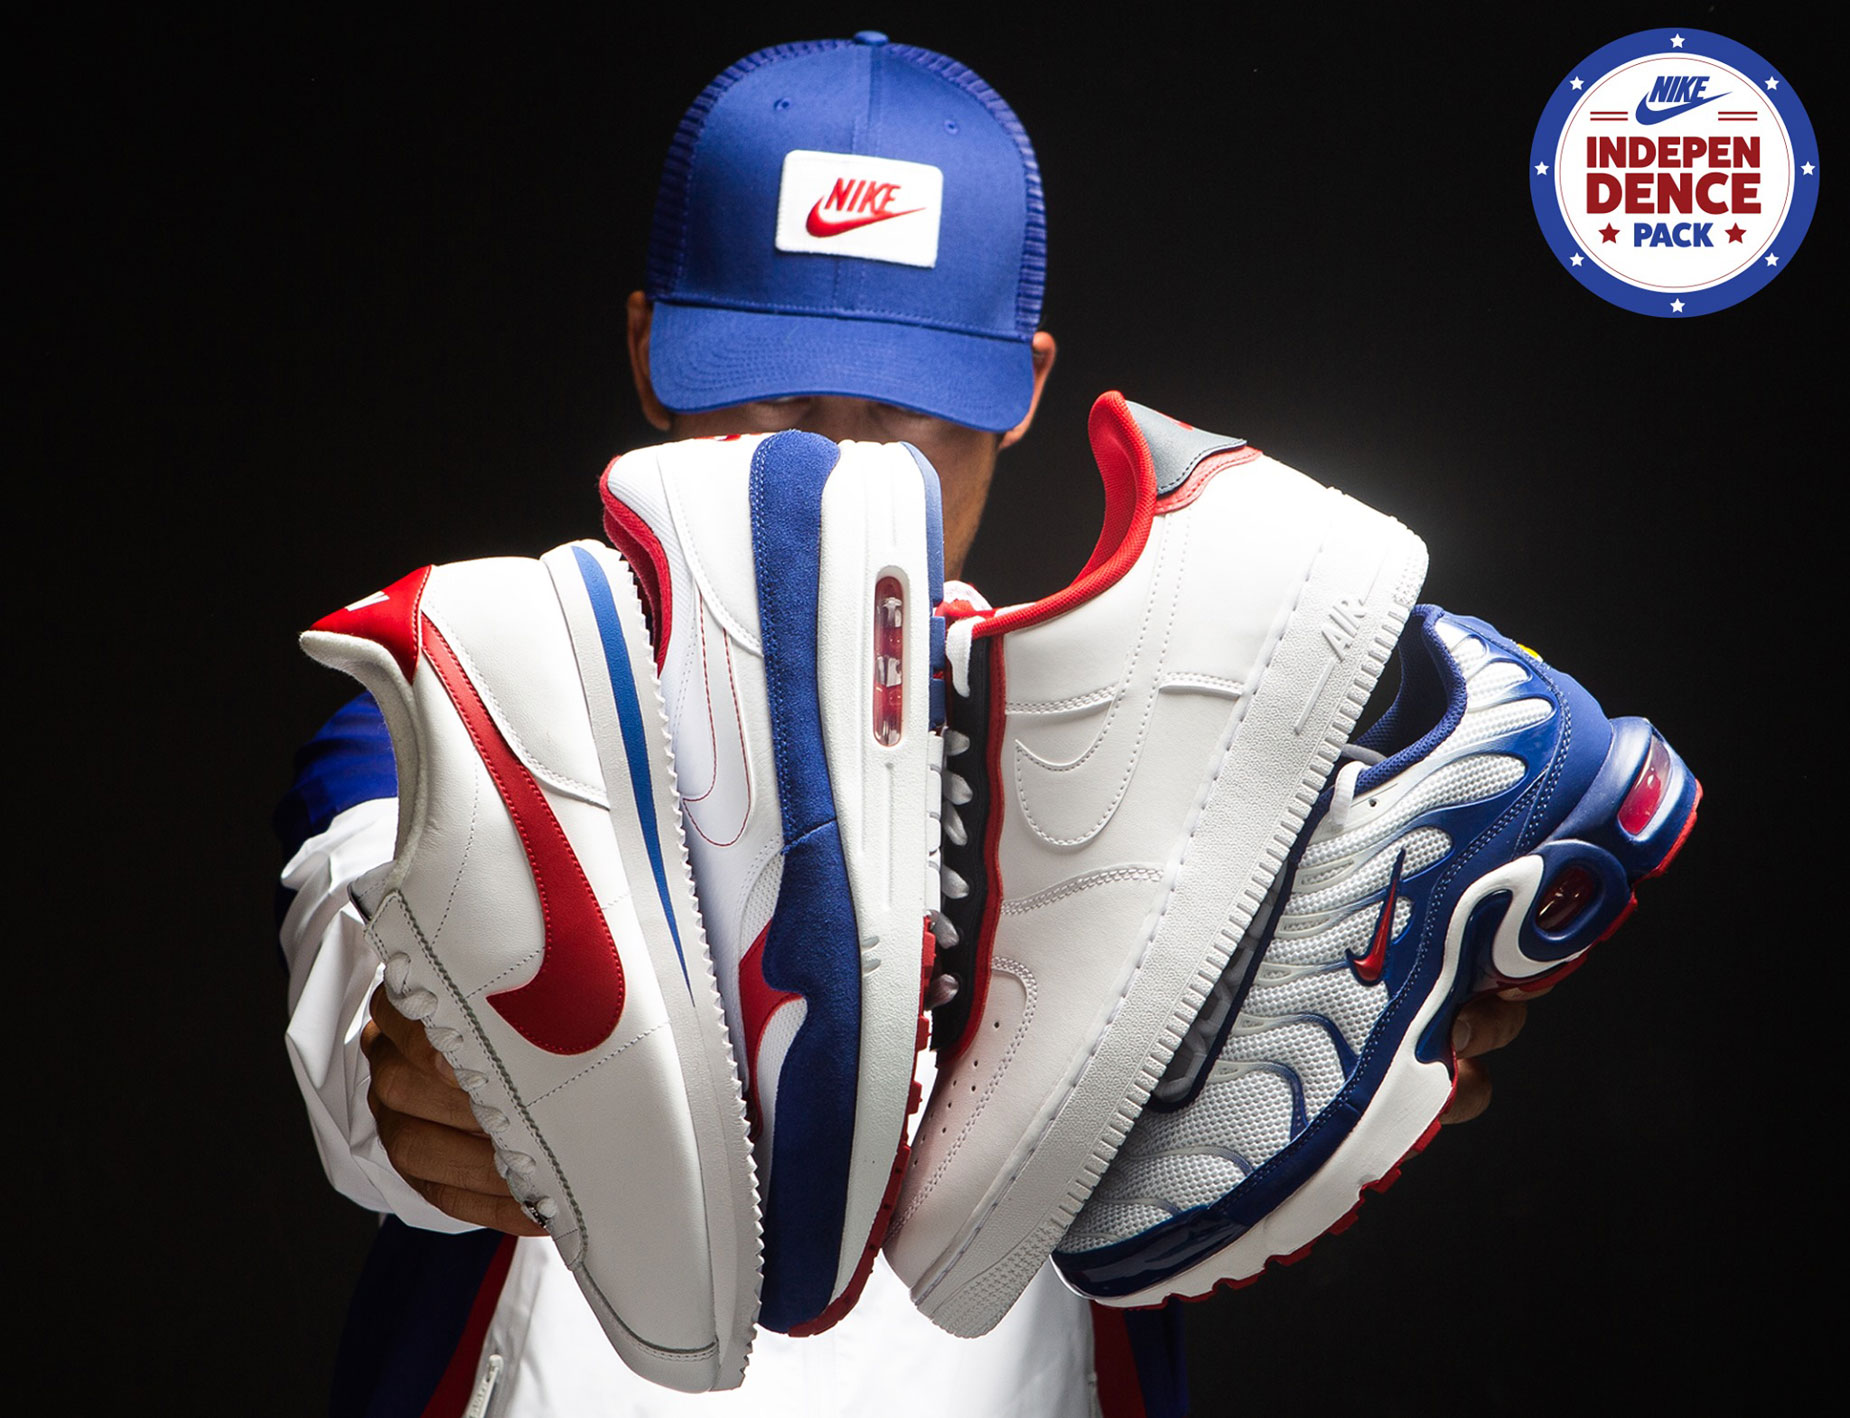 nike-americana-independence-USA-sneakers-hat-match